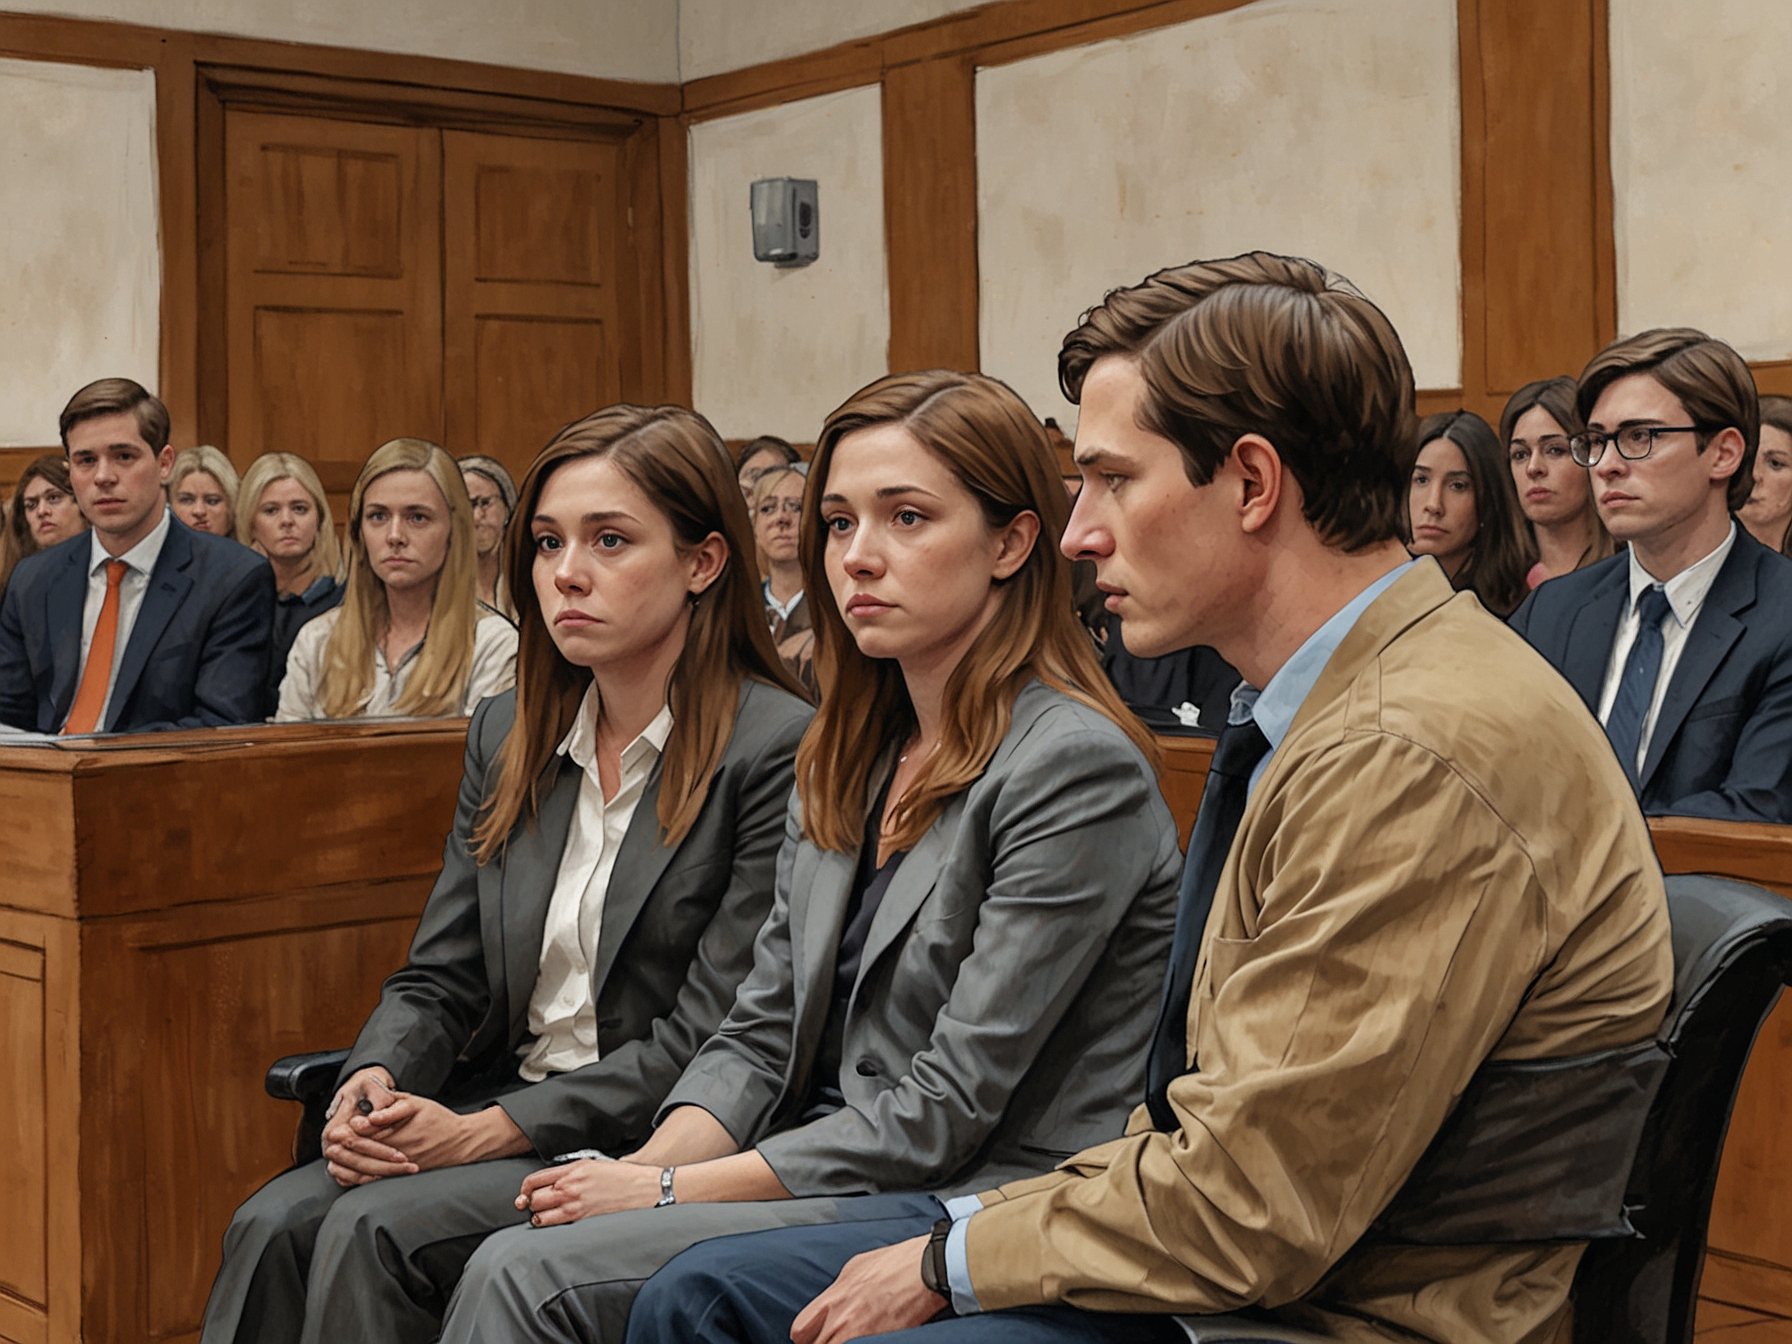 Family and friends of Blaze Bernstein sit in the courtroom, visibly emotional. Their presence underscores the human cost of the trial, emphasizing the pain and loss they continue to endure as the trial moves forward.